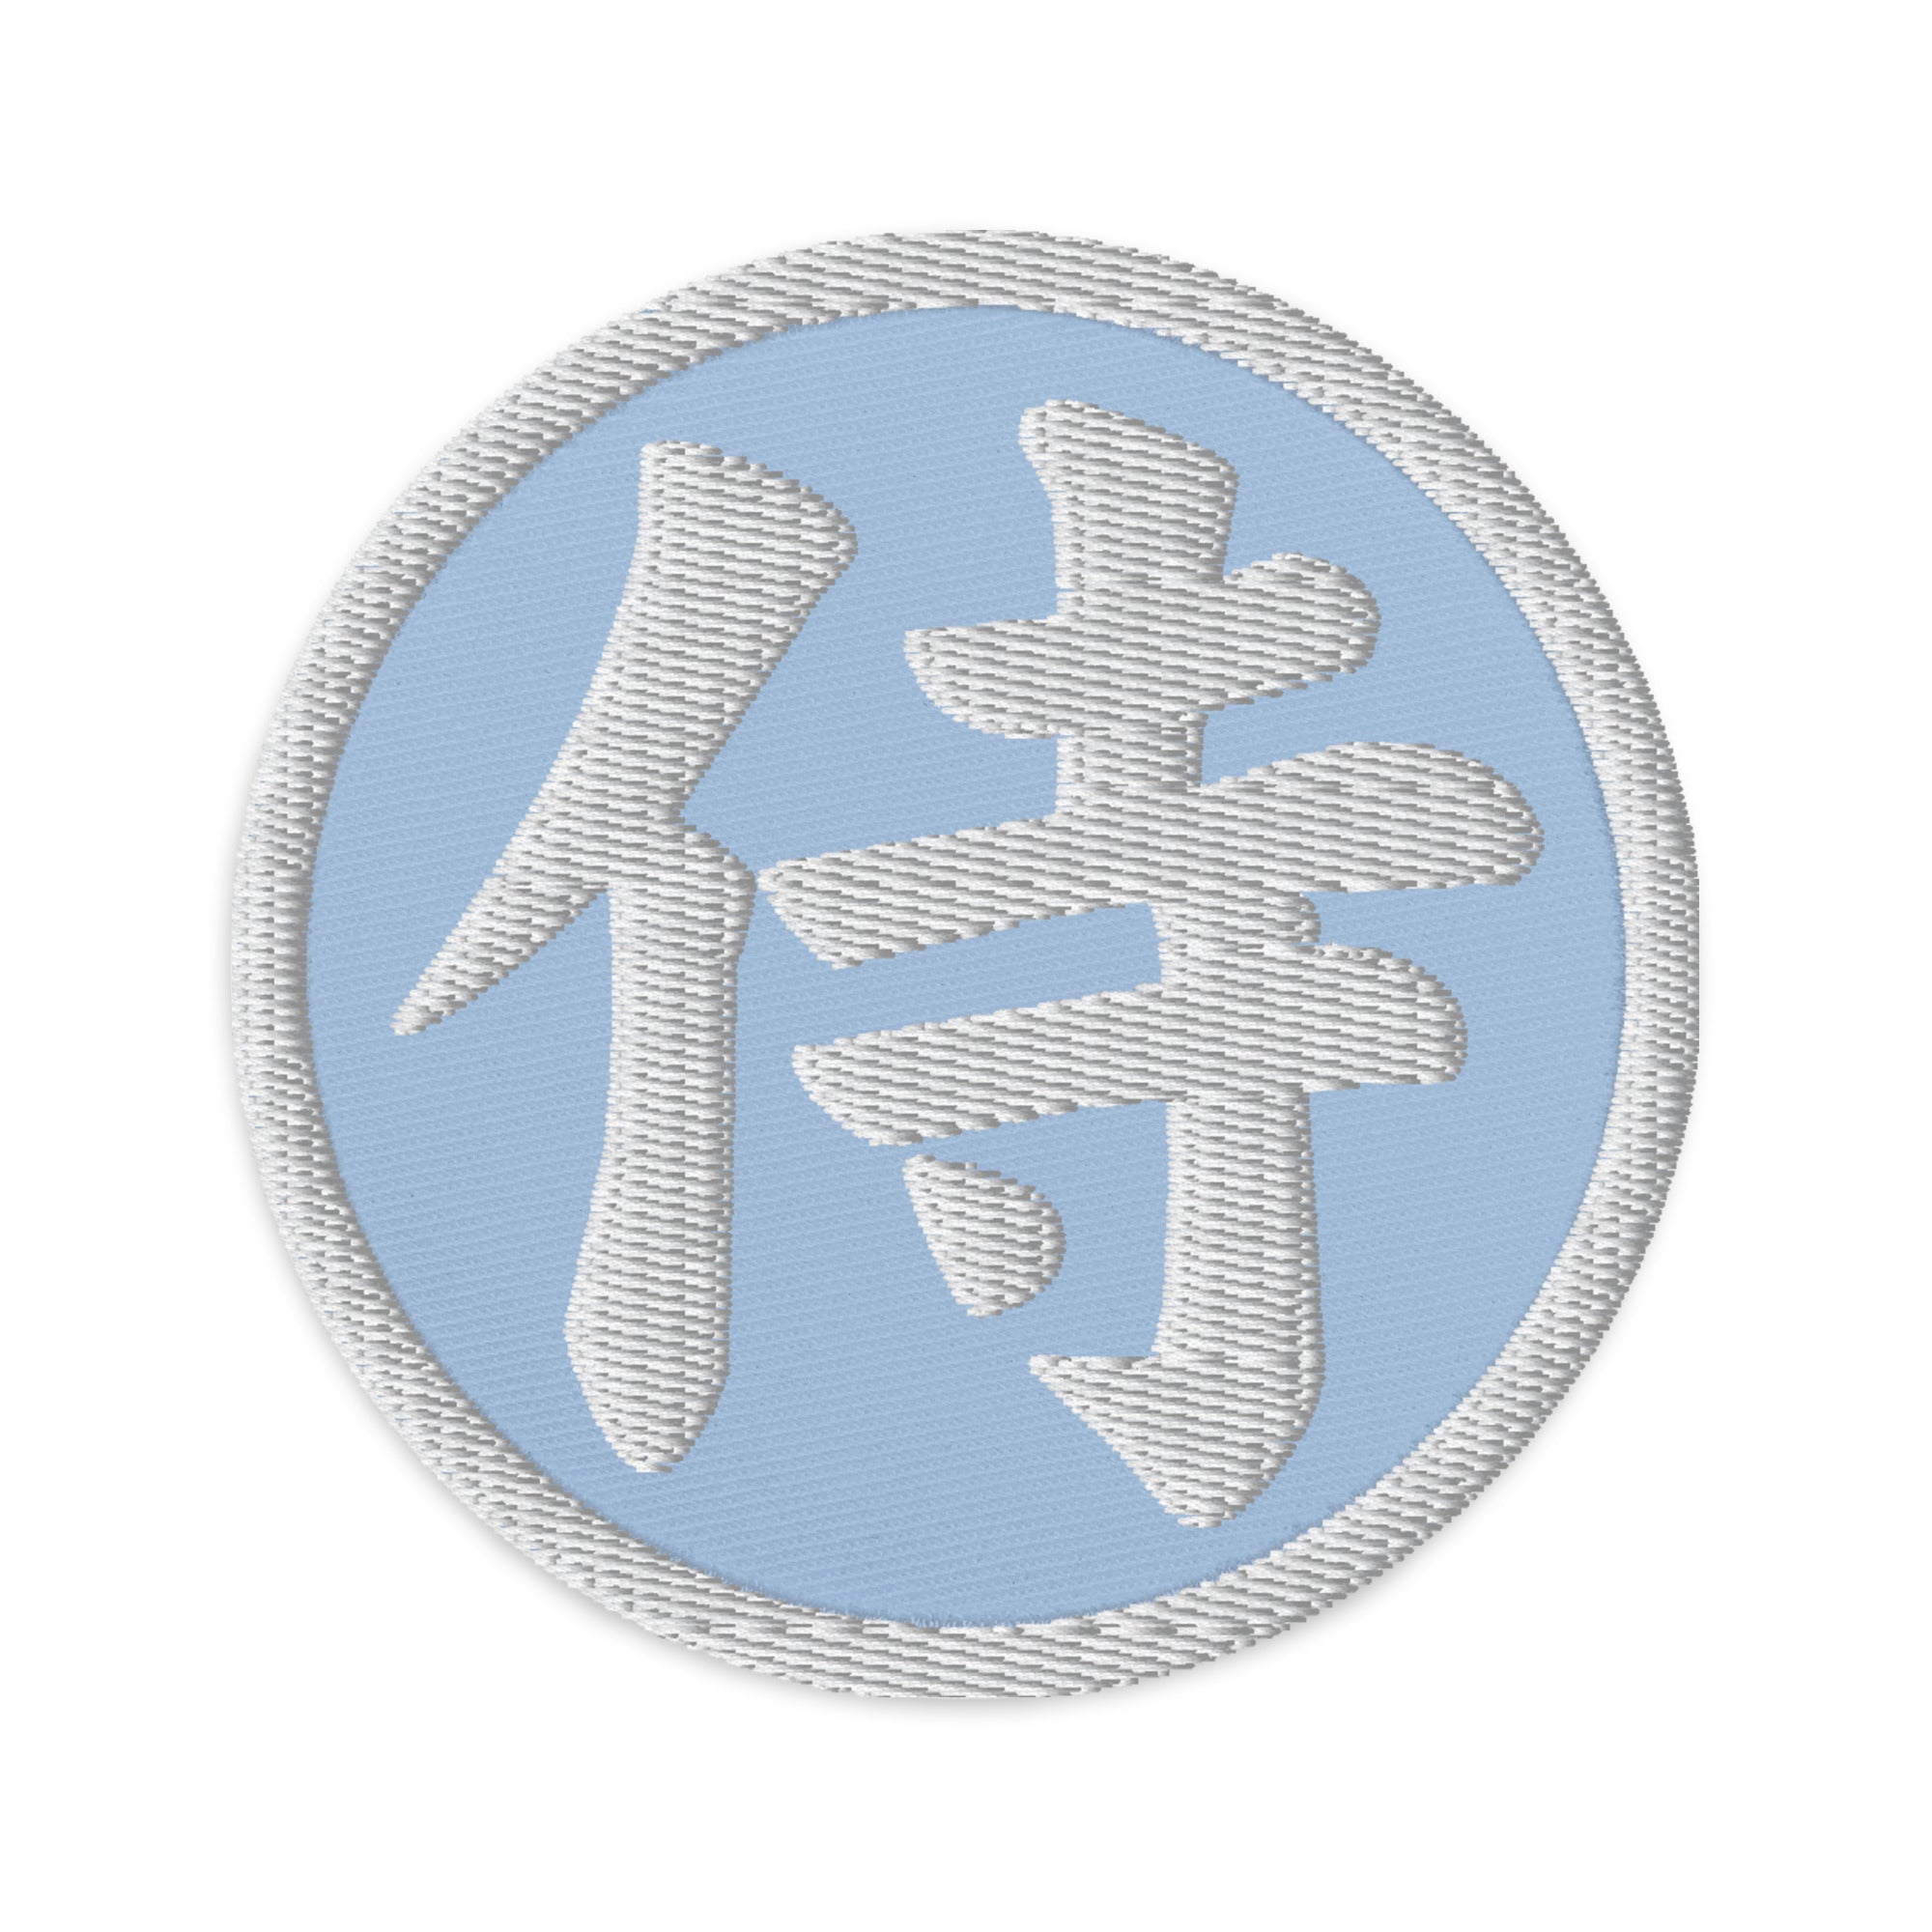 Samurai The Japanese Kanji Symbol Embroidered Patch White Thread Patches - Edge of Life Designs